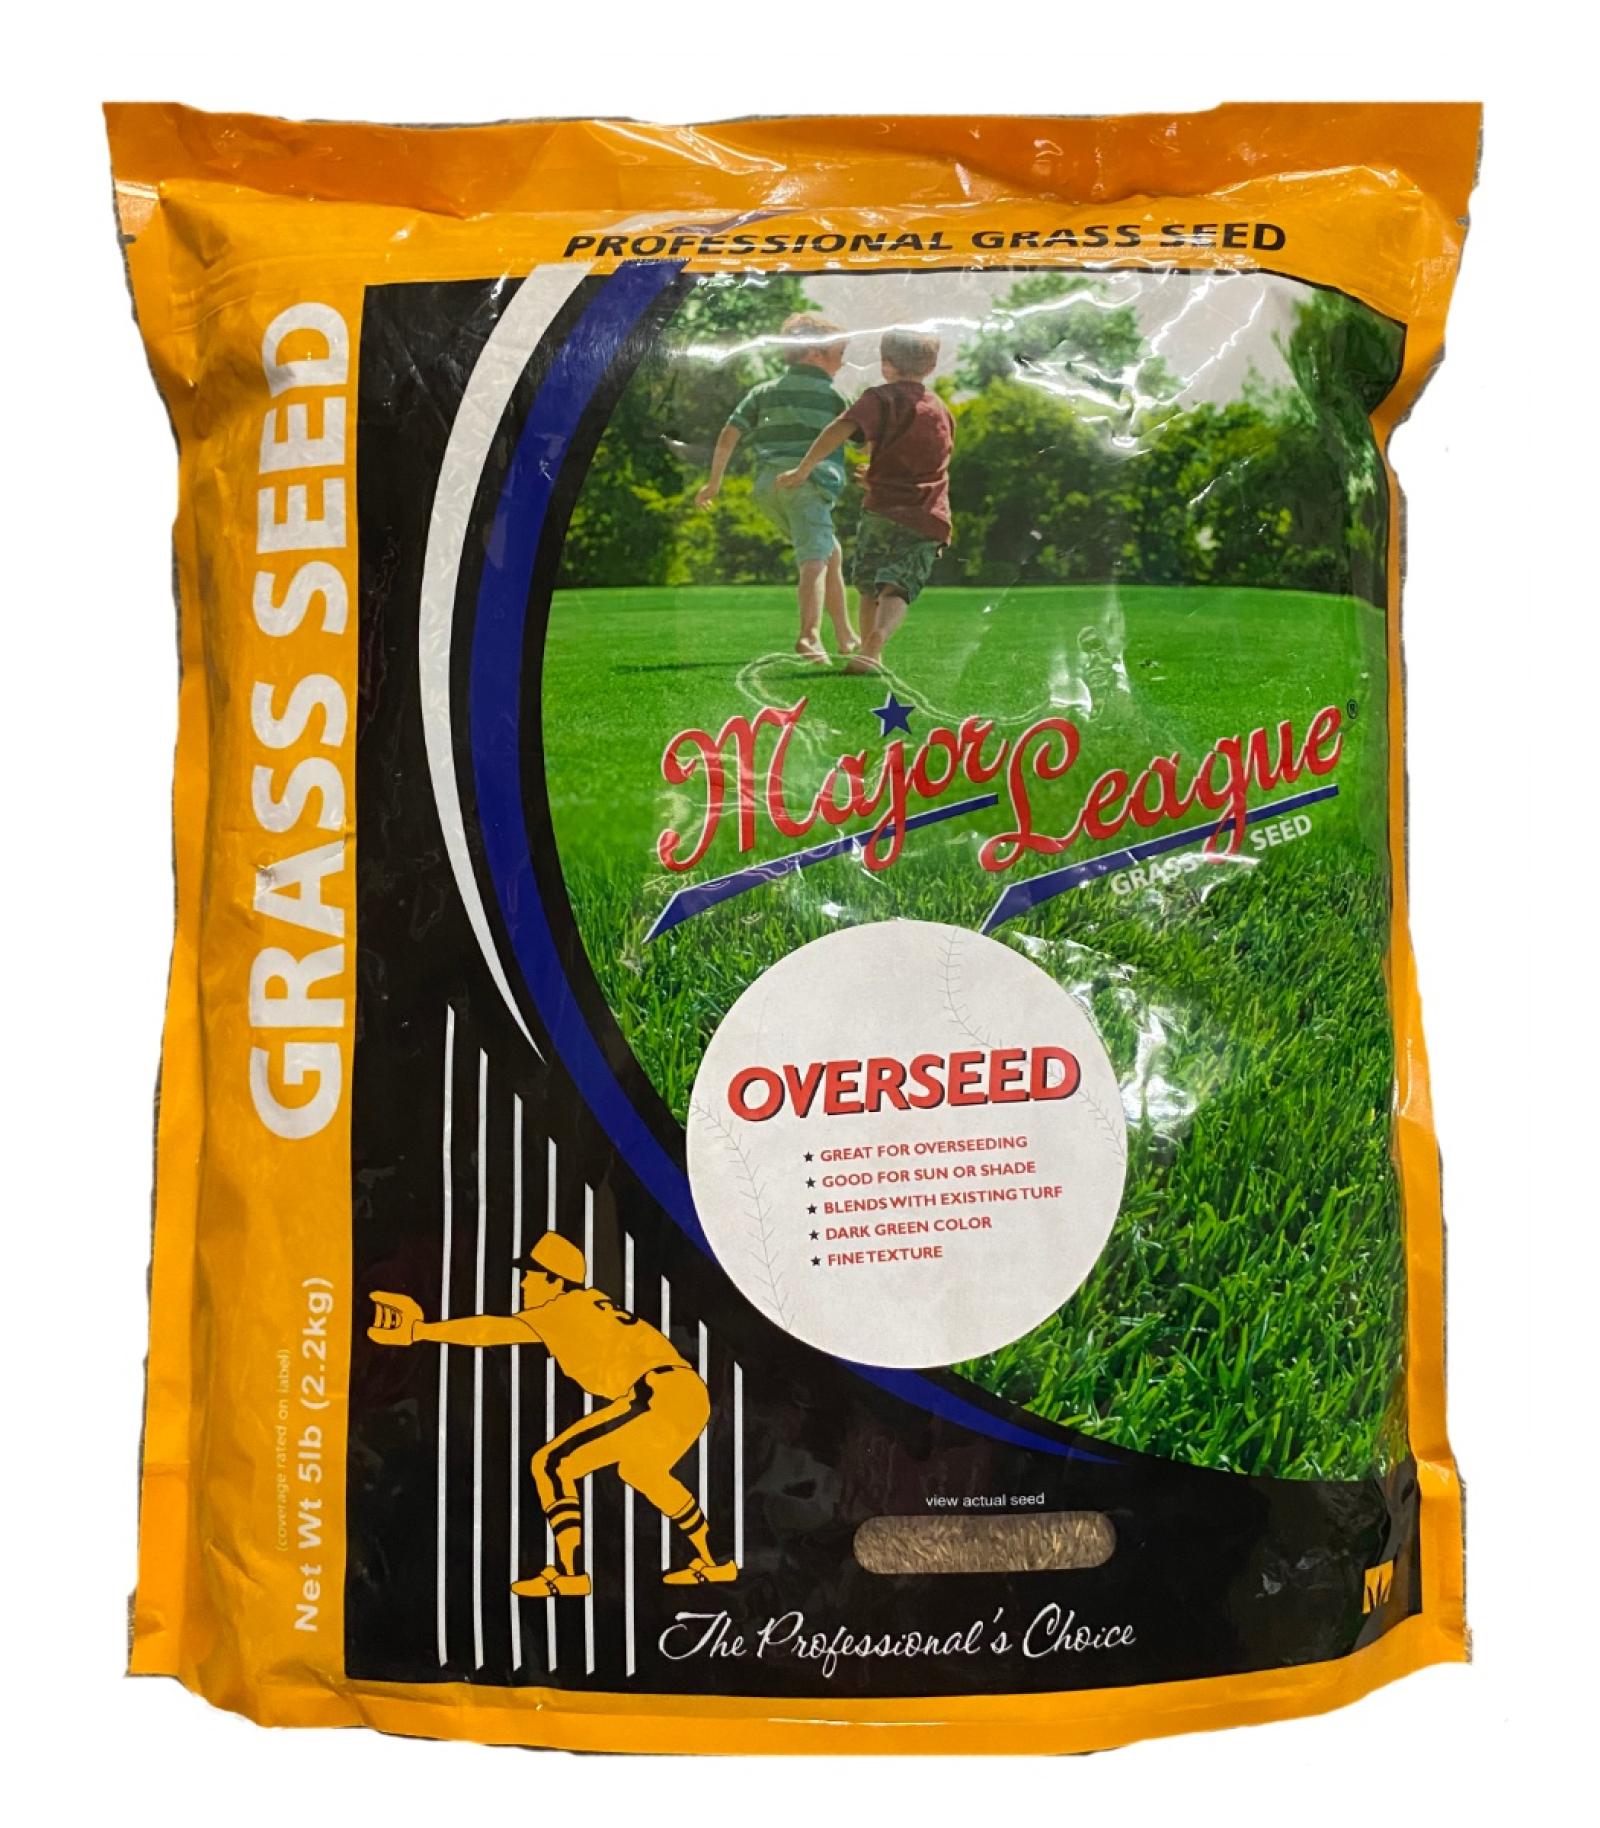 Major League Overseed Mix Grass Seed